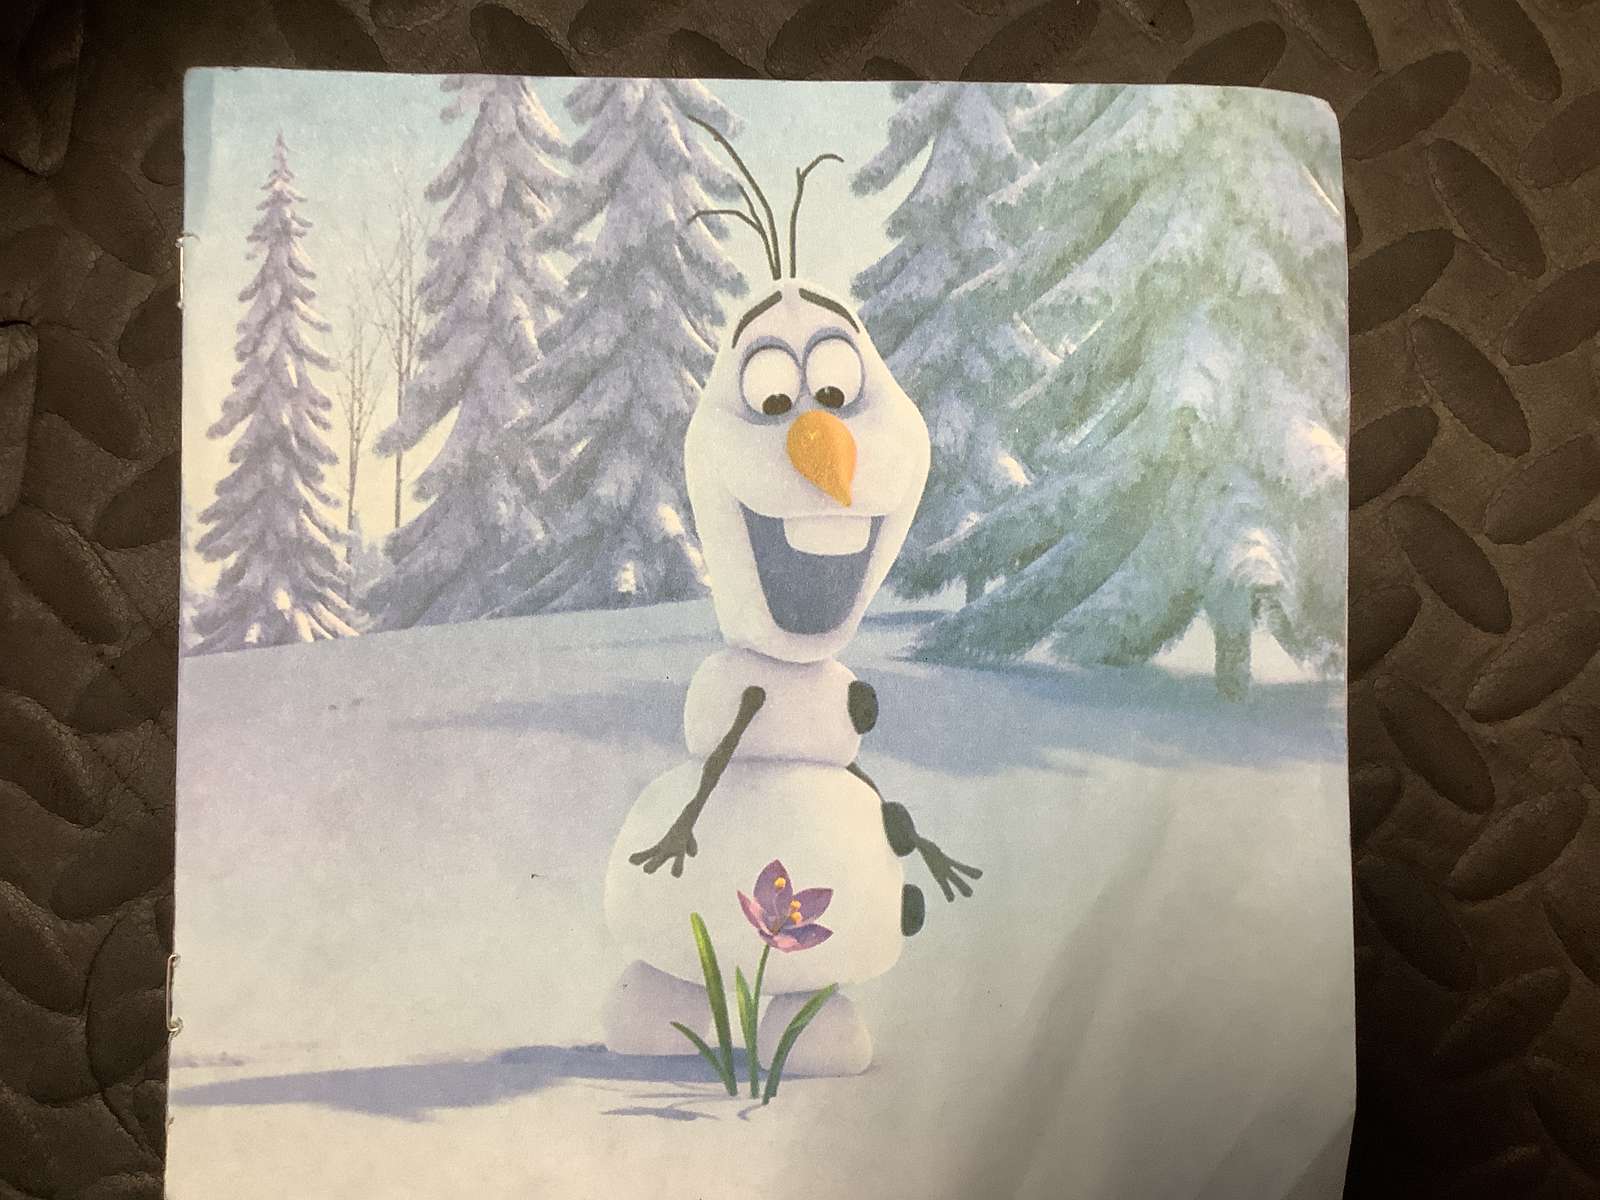 Olaf nella neve puzzle online